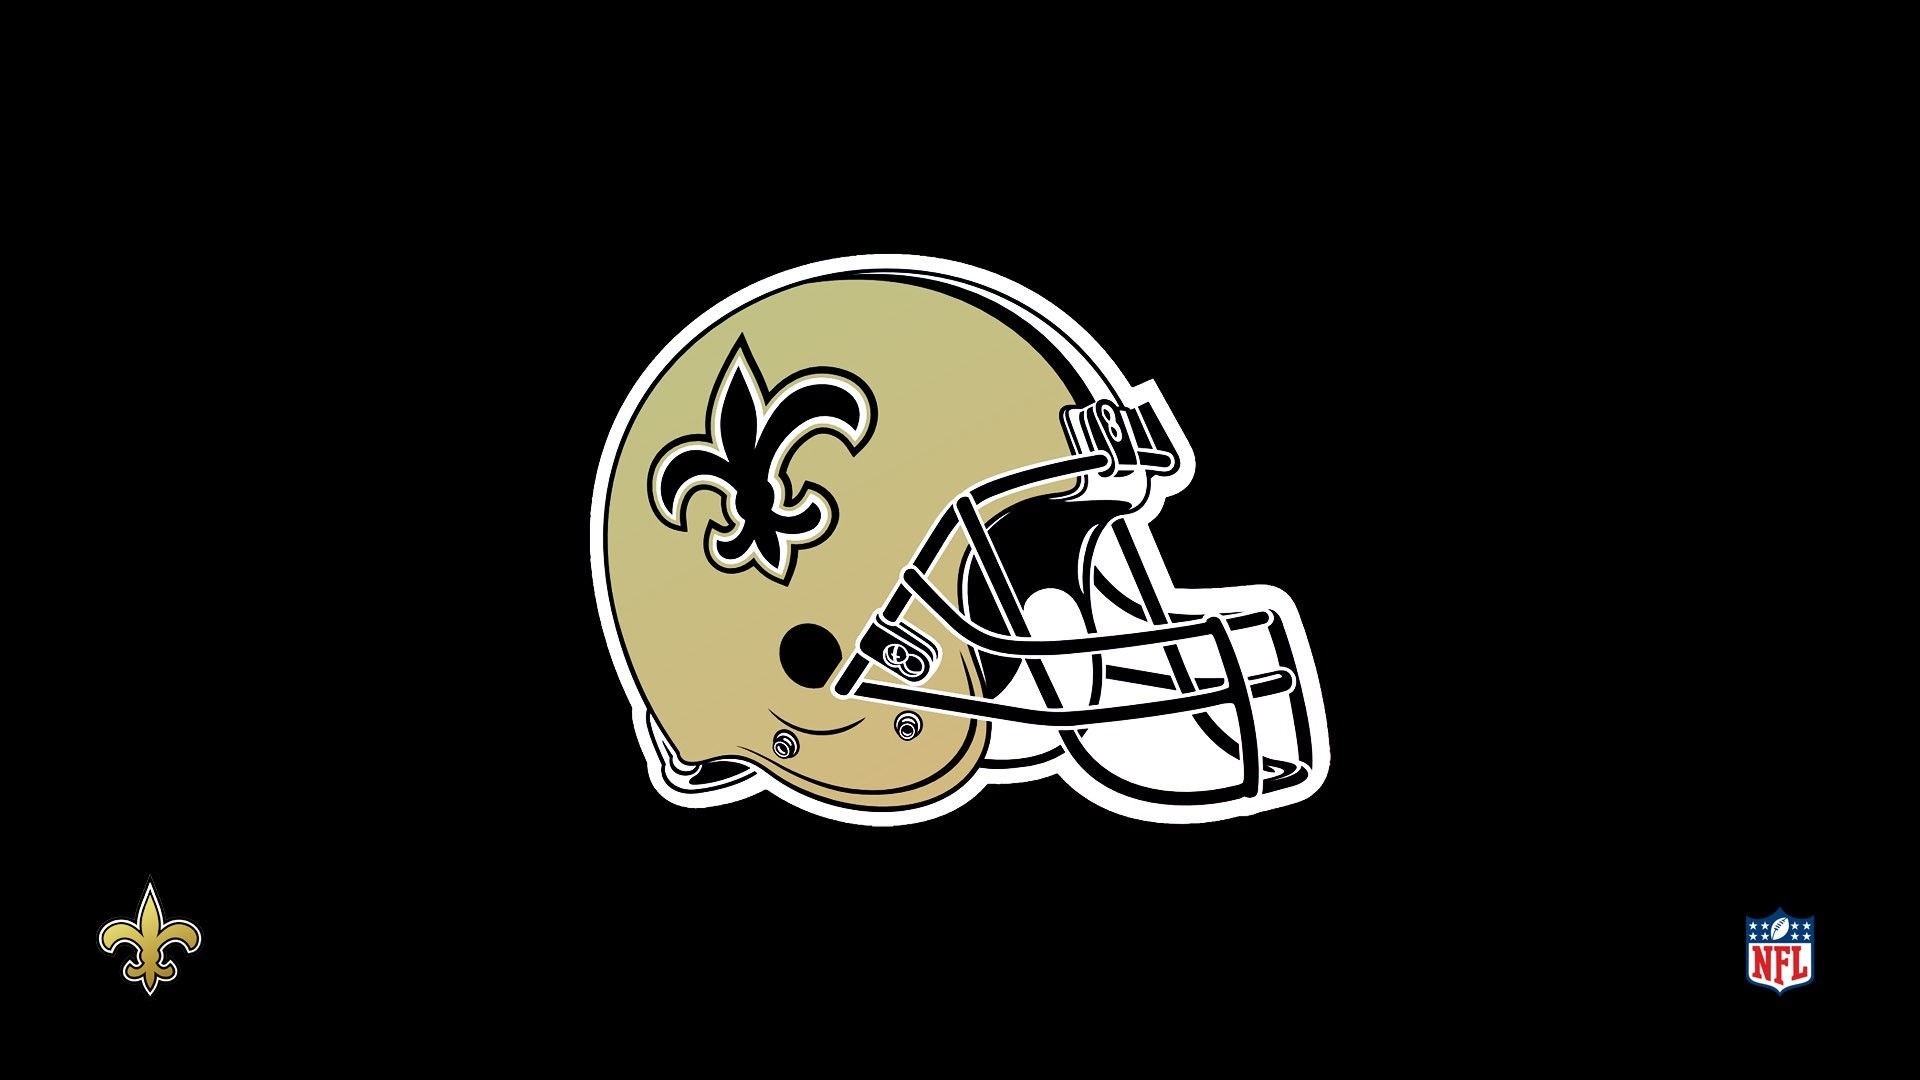 HD Desktop Wallpaper New Orleans Saints With Resolution 1920X1080 pixel. You can make this wallpaper for your Mac or Windows Desktop Background, iPhone, Android or Tablet and another Smartphone device for free